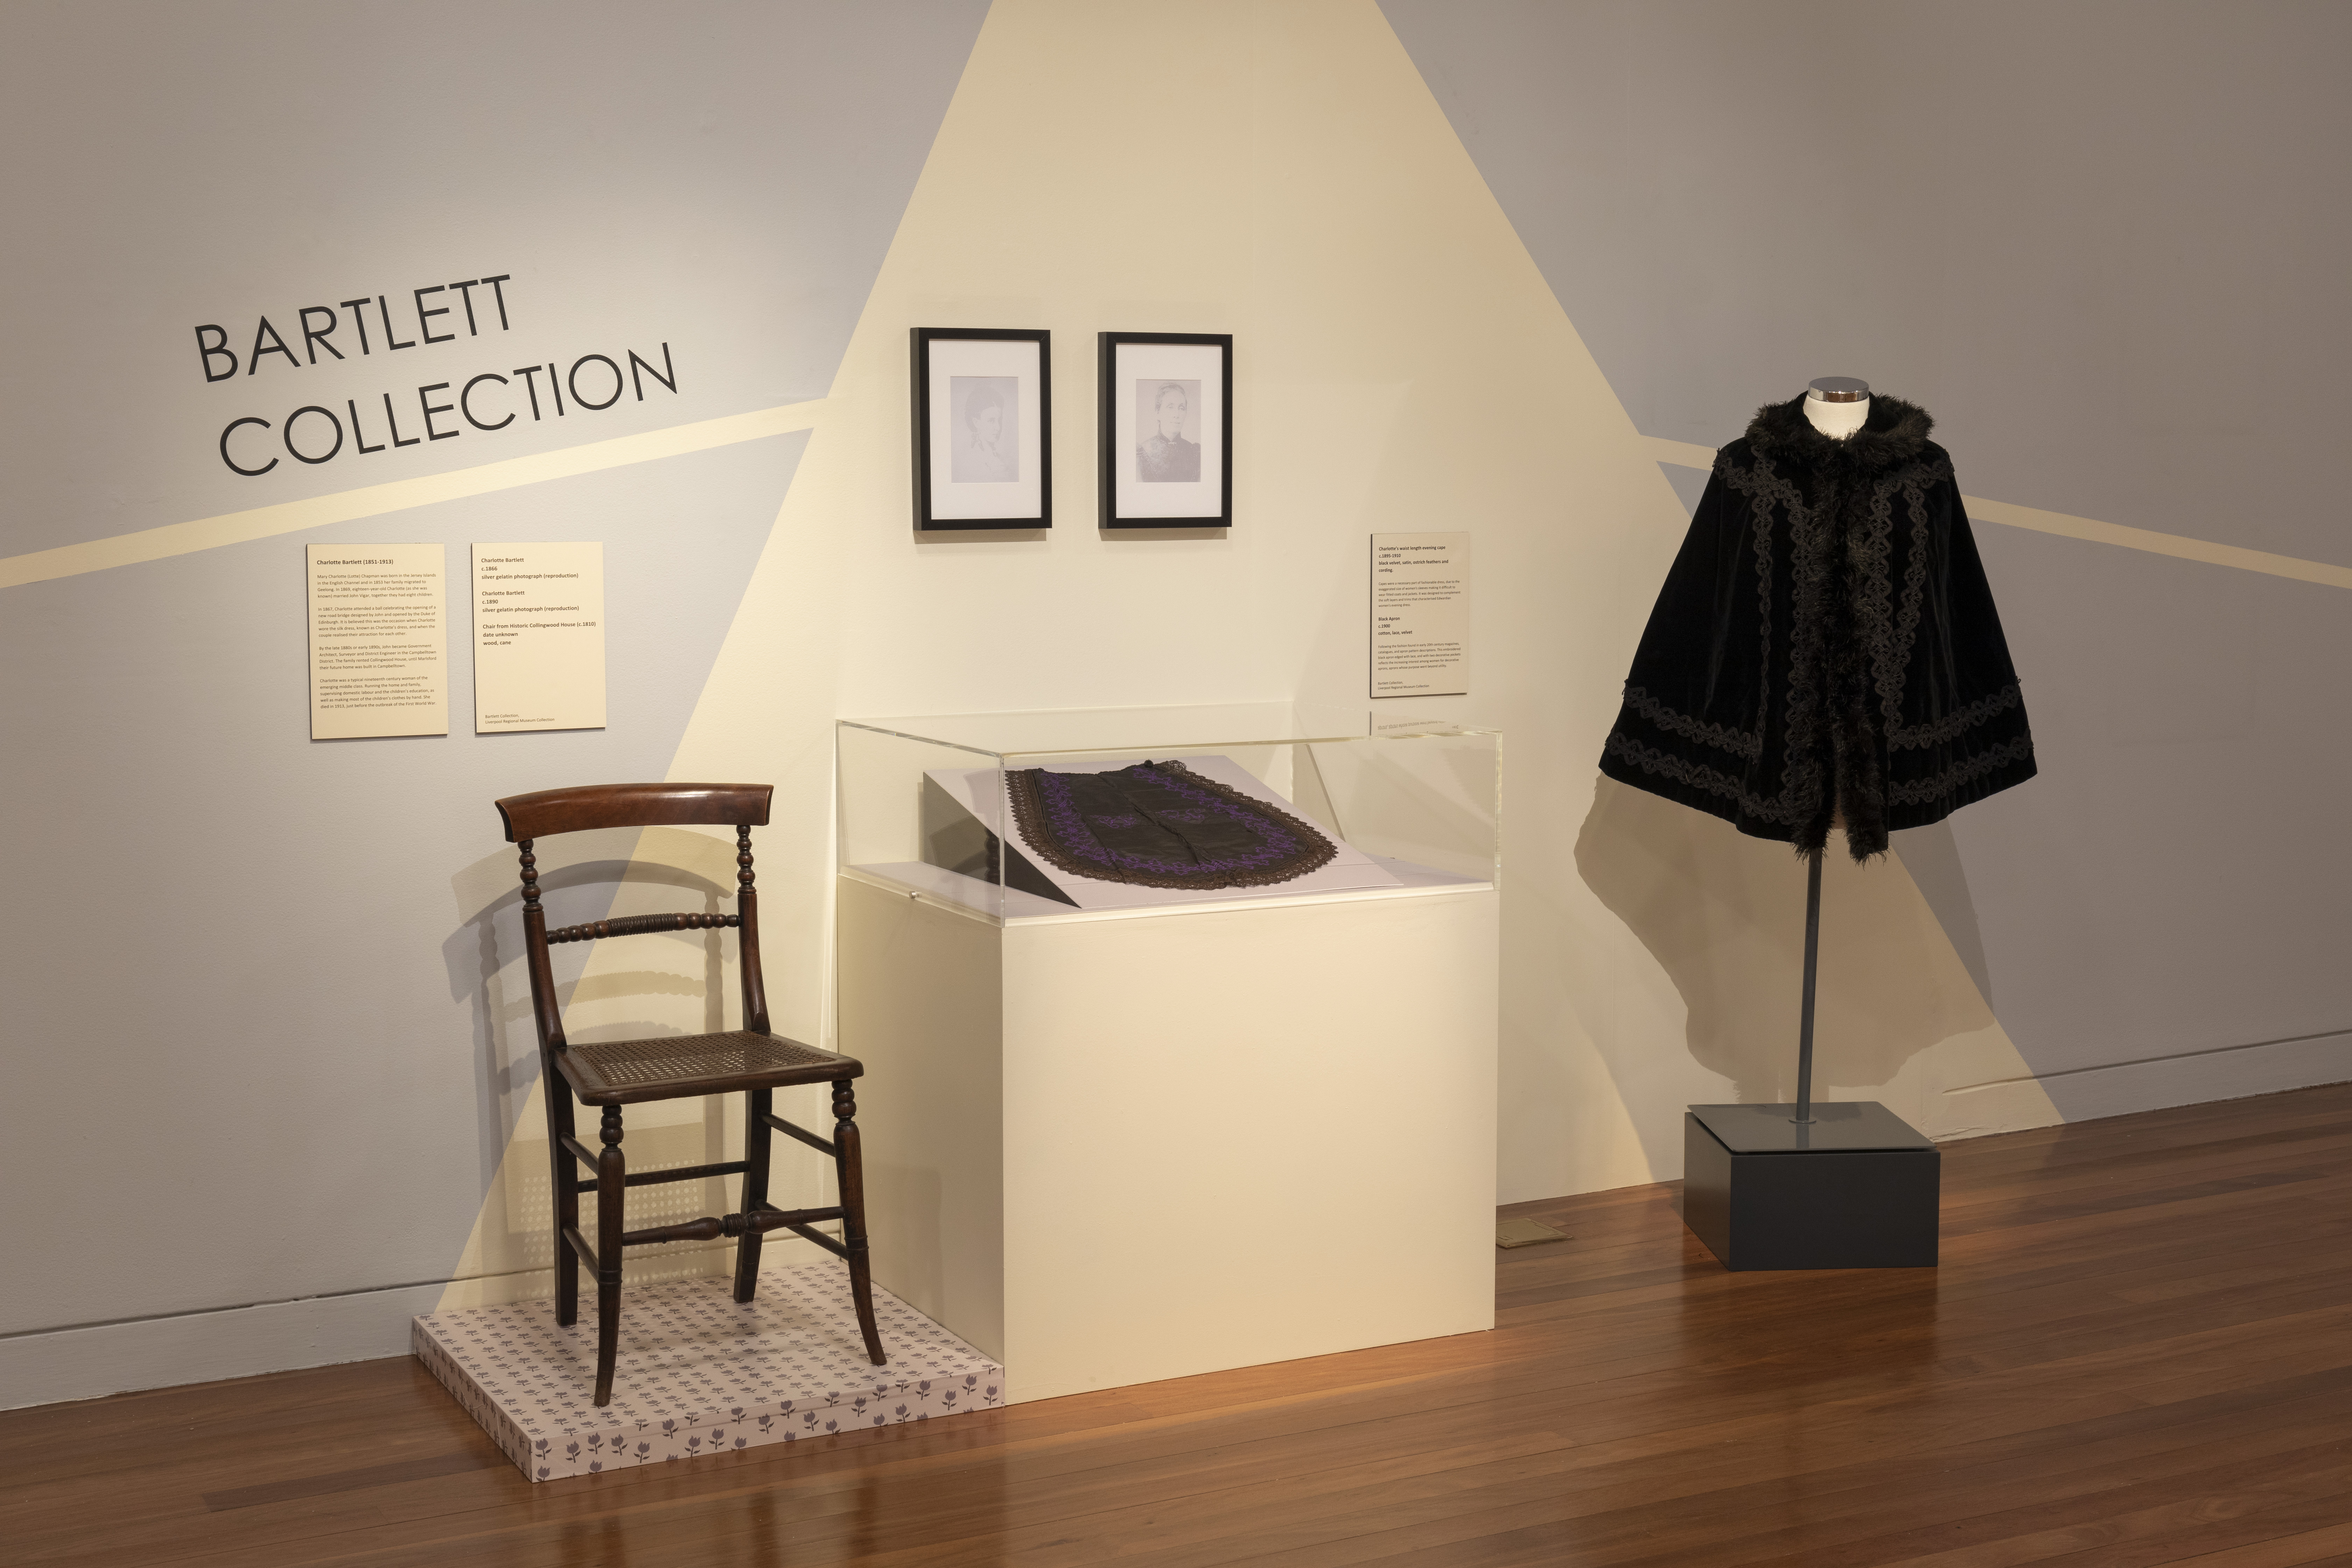 Bartlett Collection at Liverpool Regional Museum 